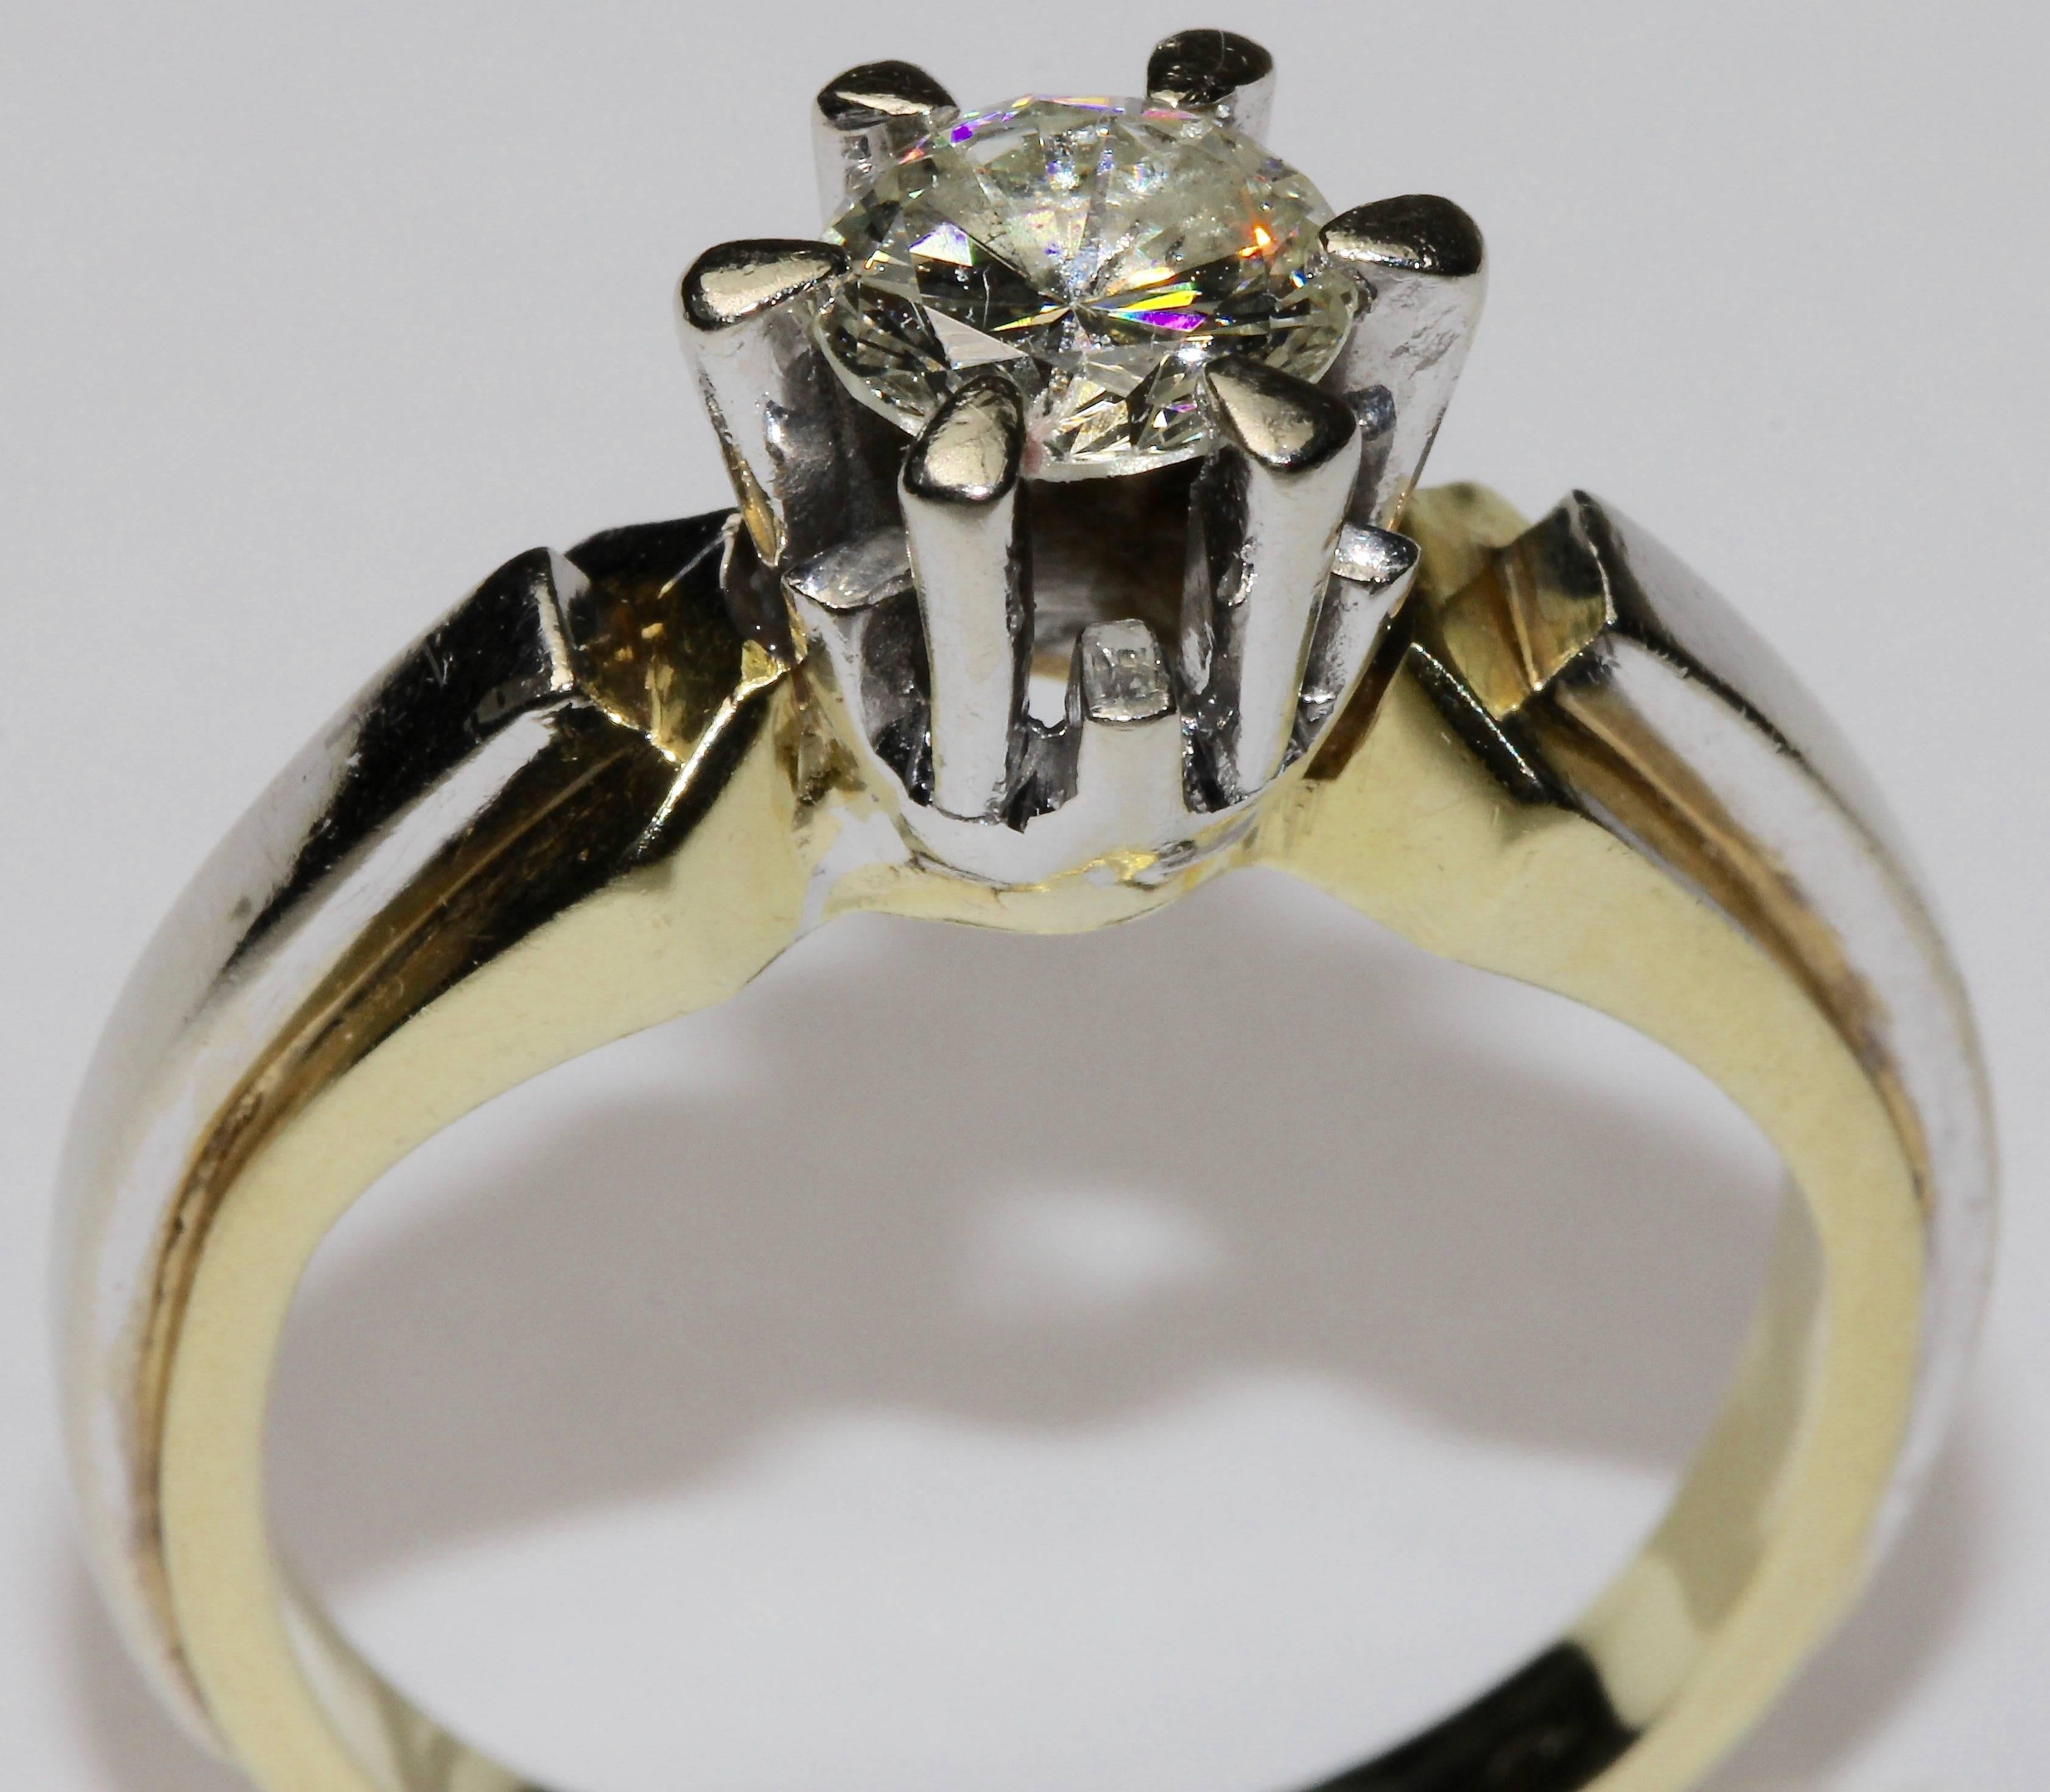 Fantastic solitaire Ring with large round diamond in claw setting.
Size and Quality approx. 0.82 carat (engraved in frame), VVS, color F.
14k yellow gold and white gold frame.
Hallmarked.

In the photo, the solitaire appears a bit yellowish and